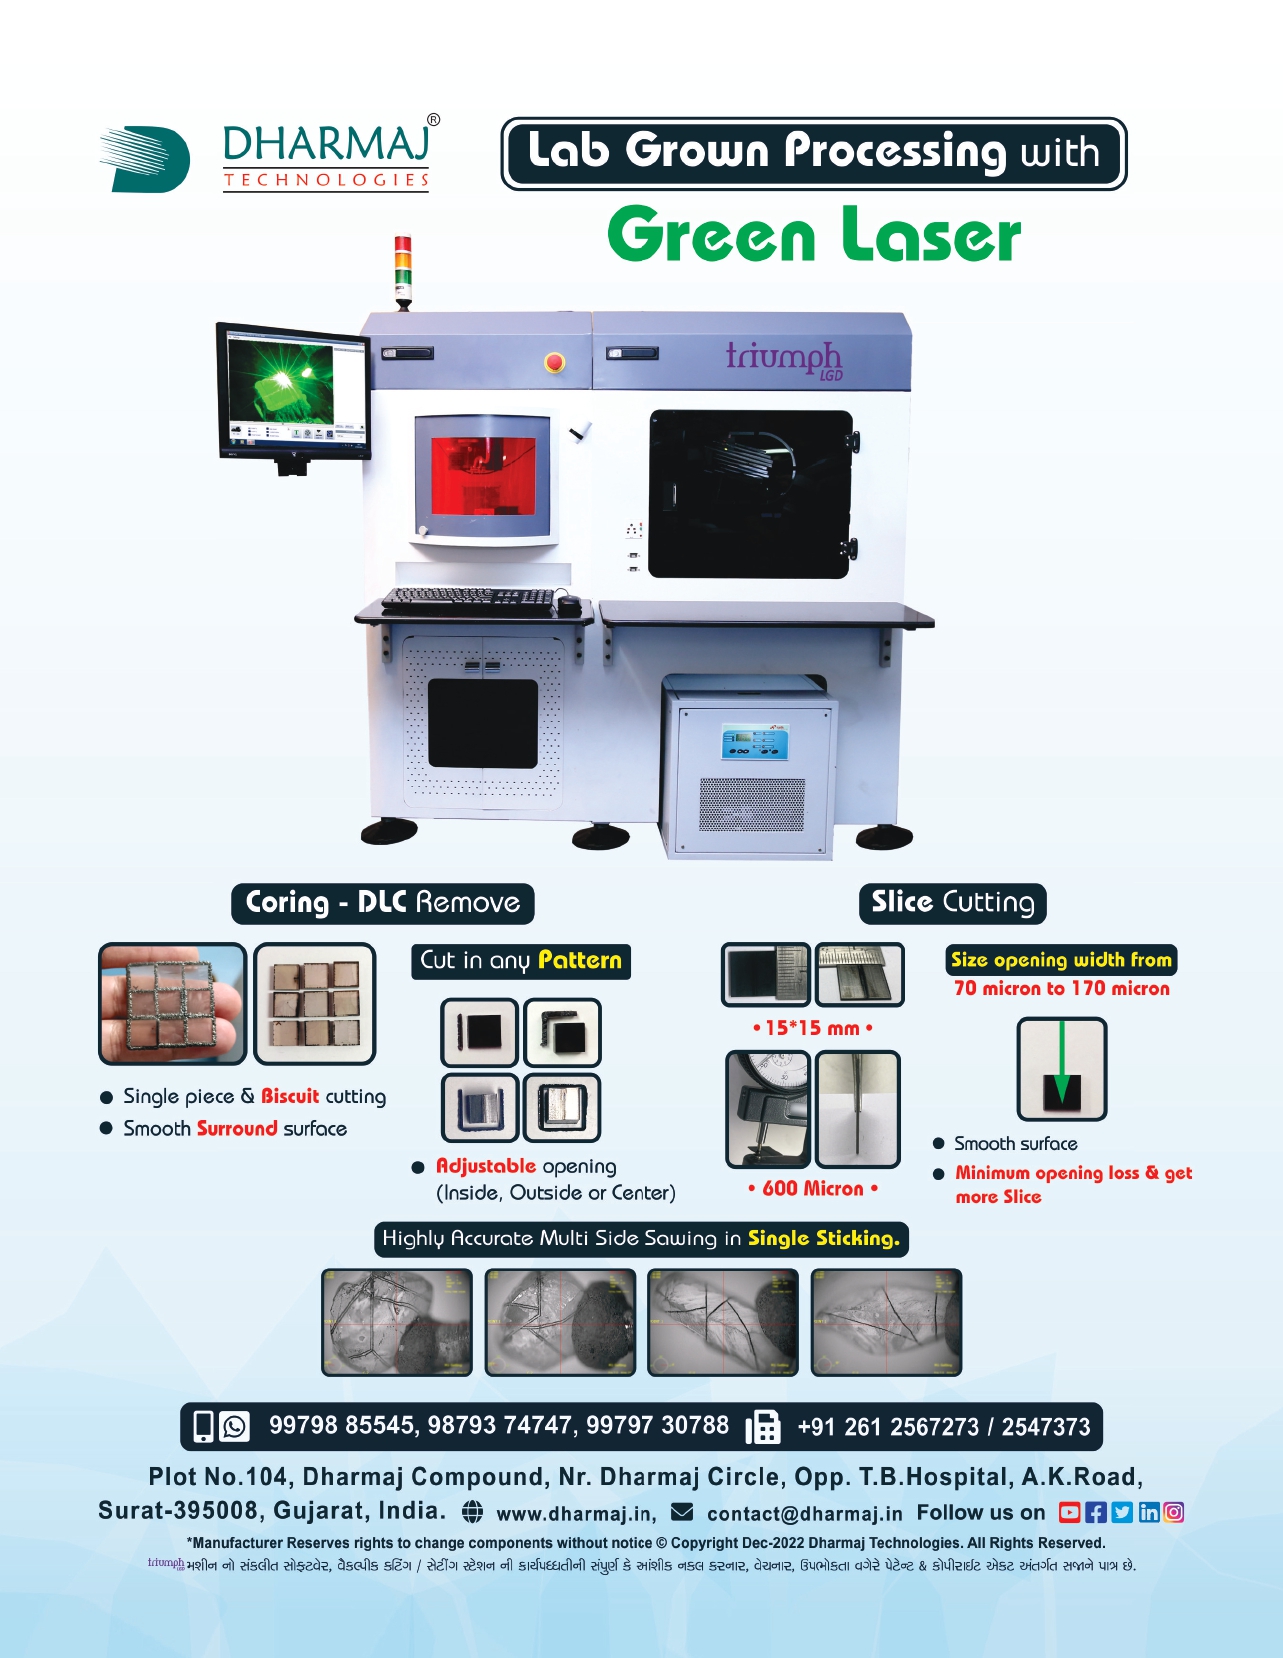 Labgrown Processing with Green Laser